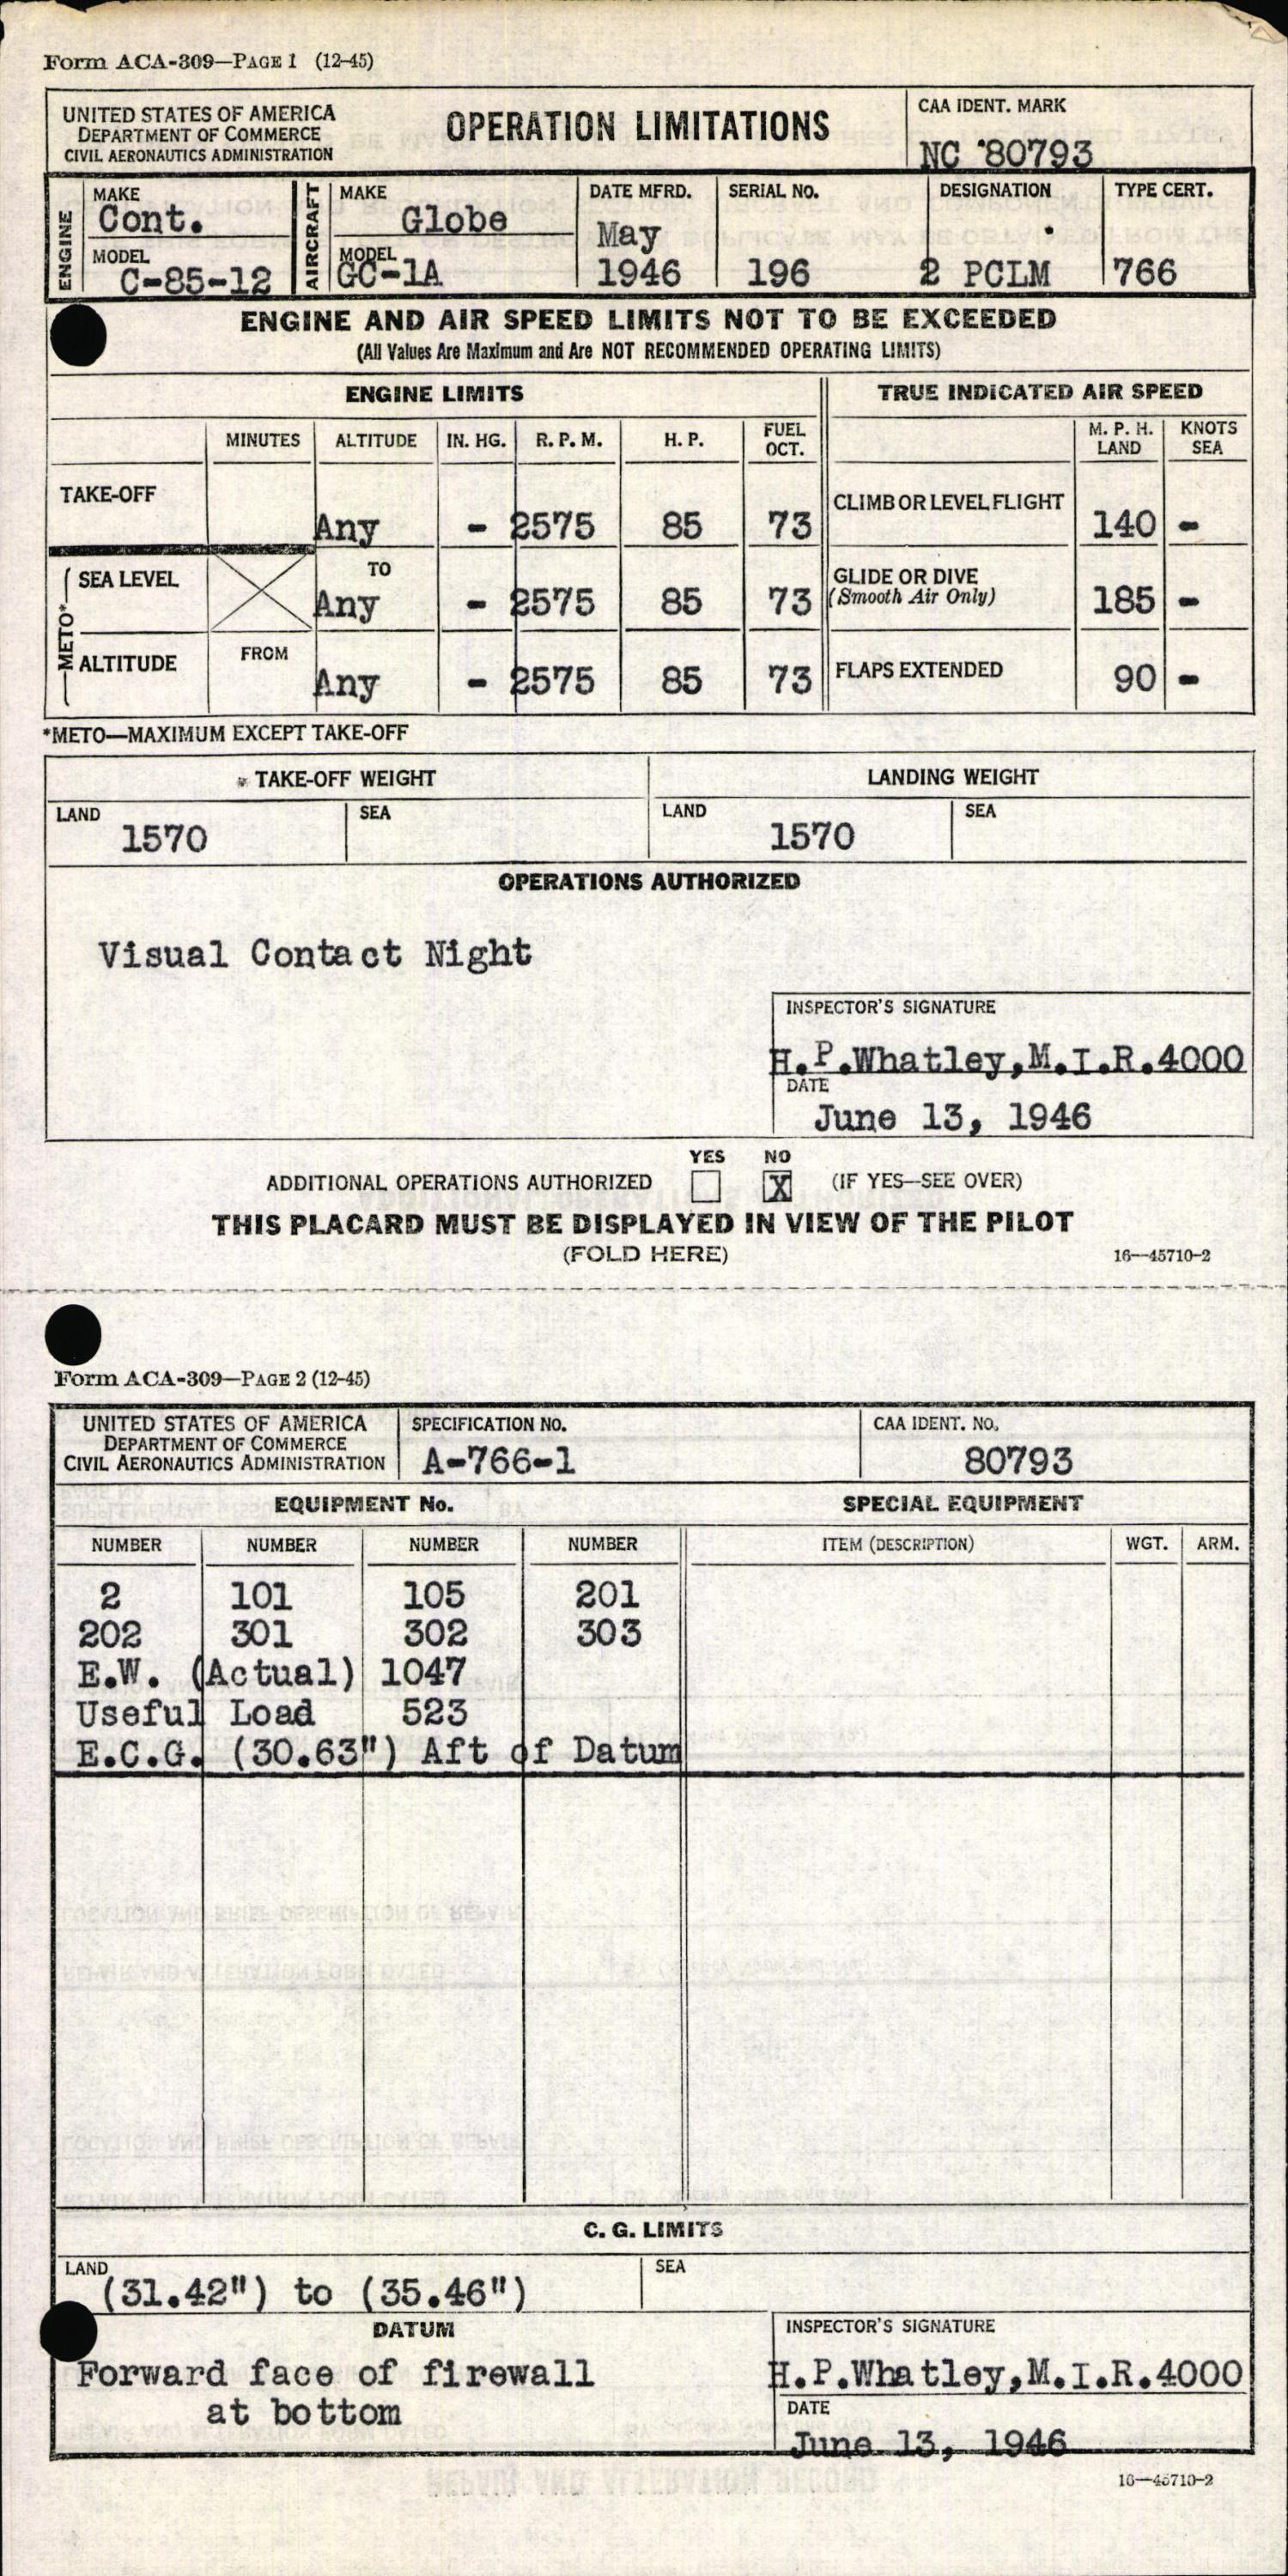 Sample page 5 from AirCorps Library document: Technical Information for Serial Number 196